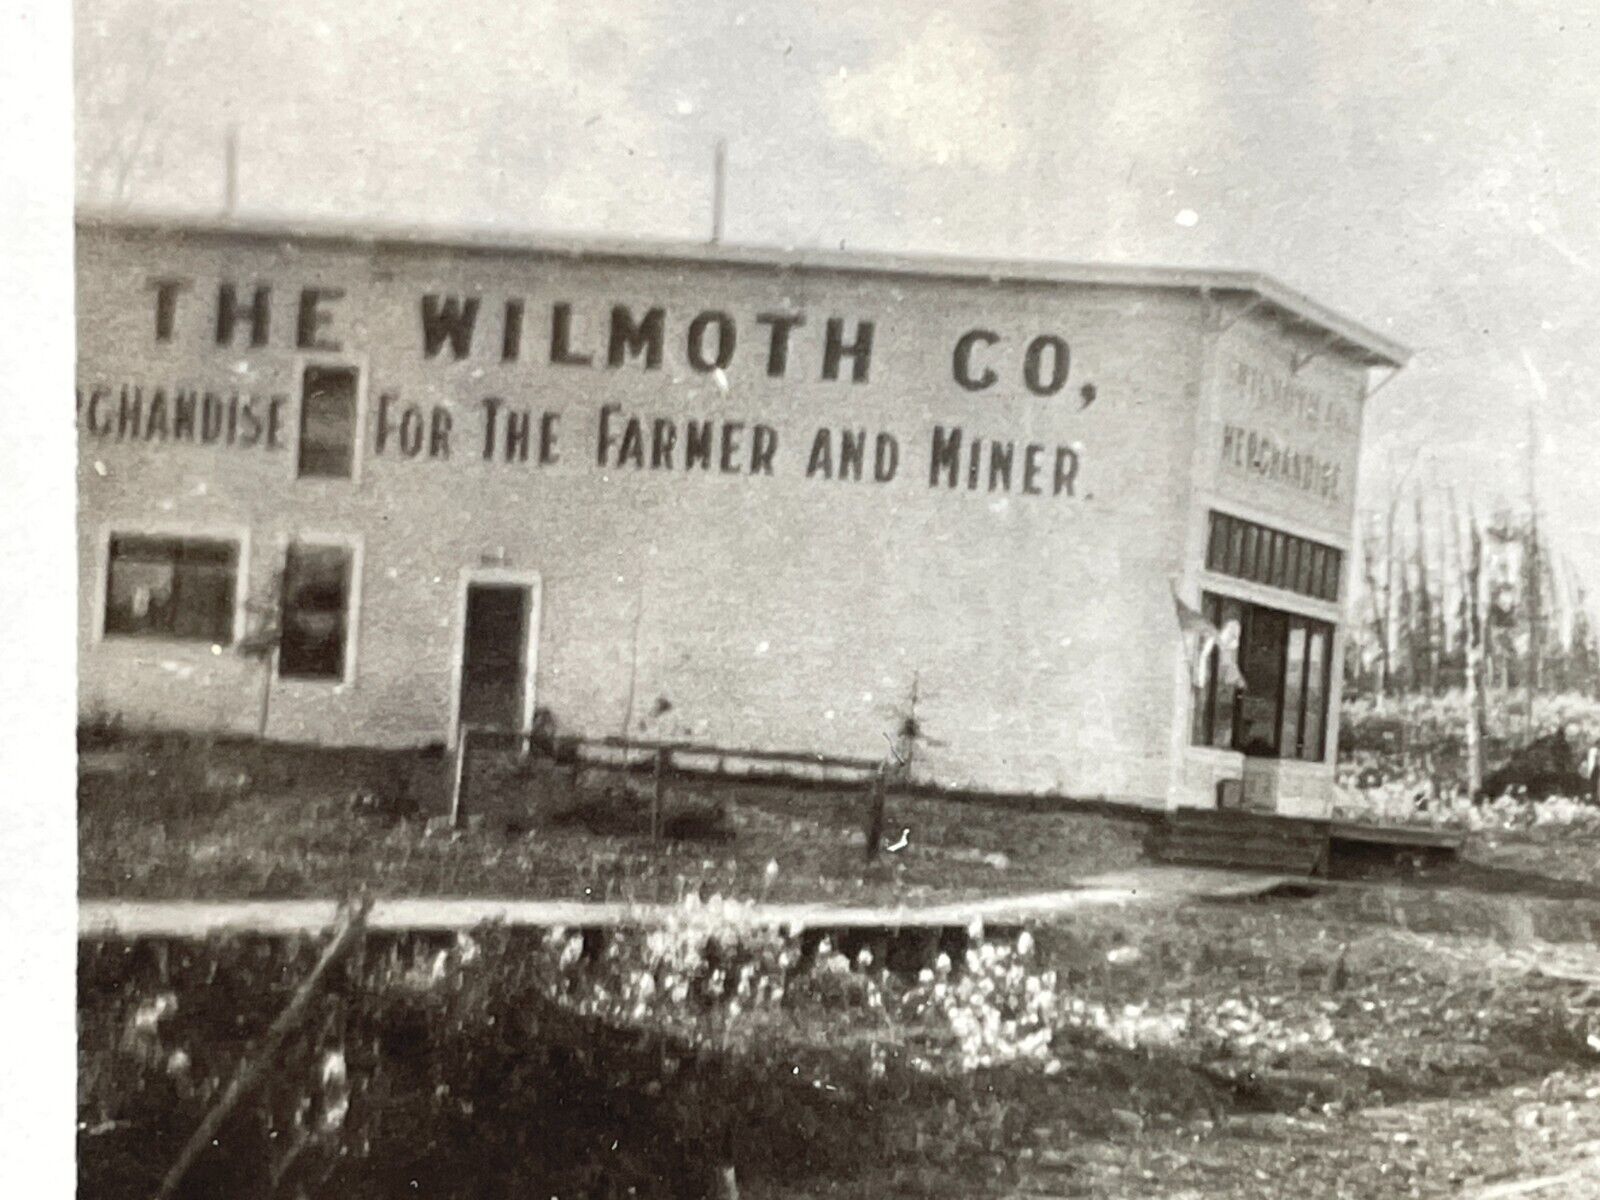 W6 Photograph Early View Downtown Wasilla Alaska Business Wimoth Co. Stores